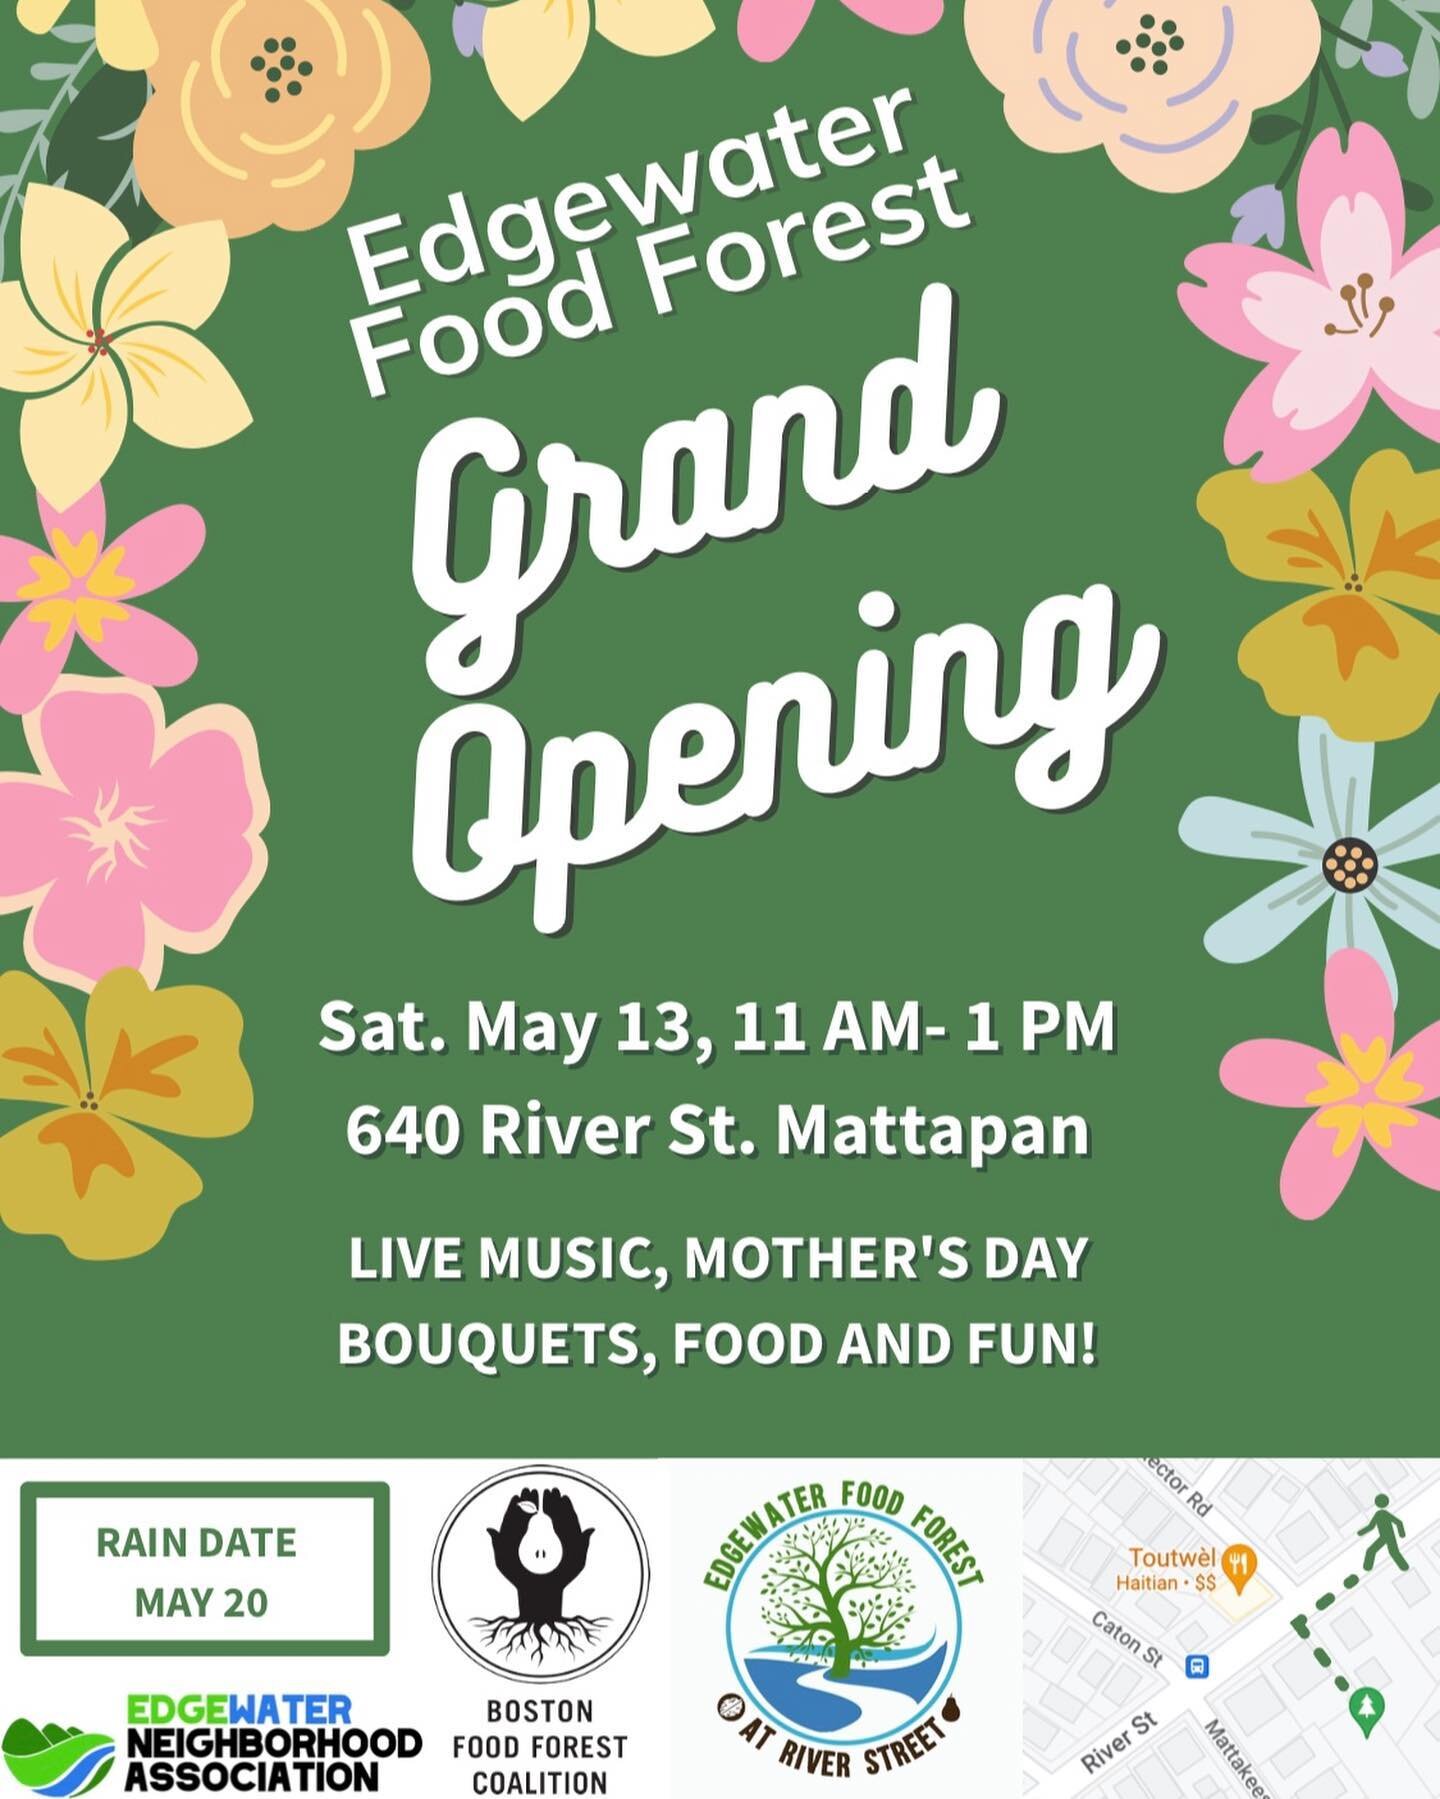 Join BFFC to celebrate the long-anticipated completion of the Edgewater Food Forest at River Street! 👏🏽👏🏾👏🏿

This food forest represents a years-long effort by dedicated community members. Help us celebrate their efforts, as well as those of th